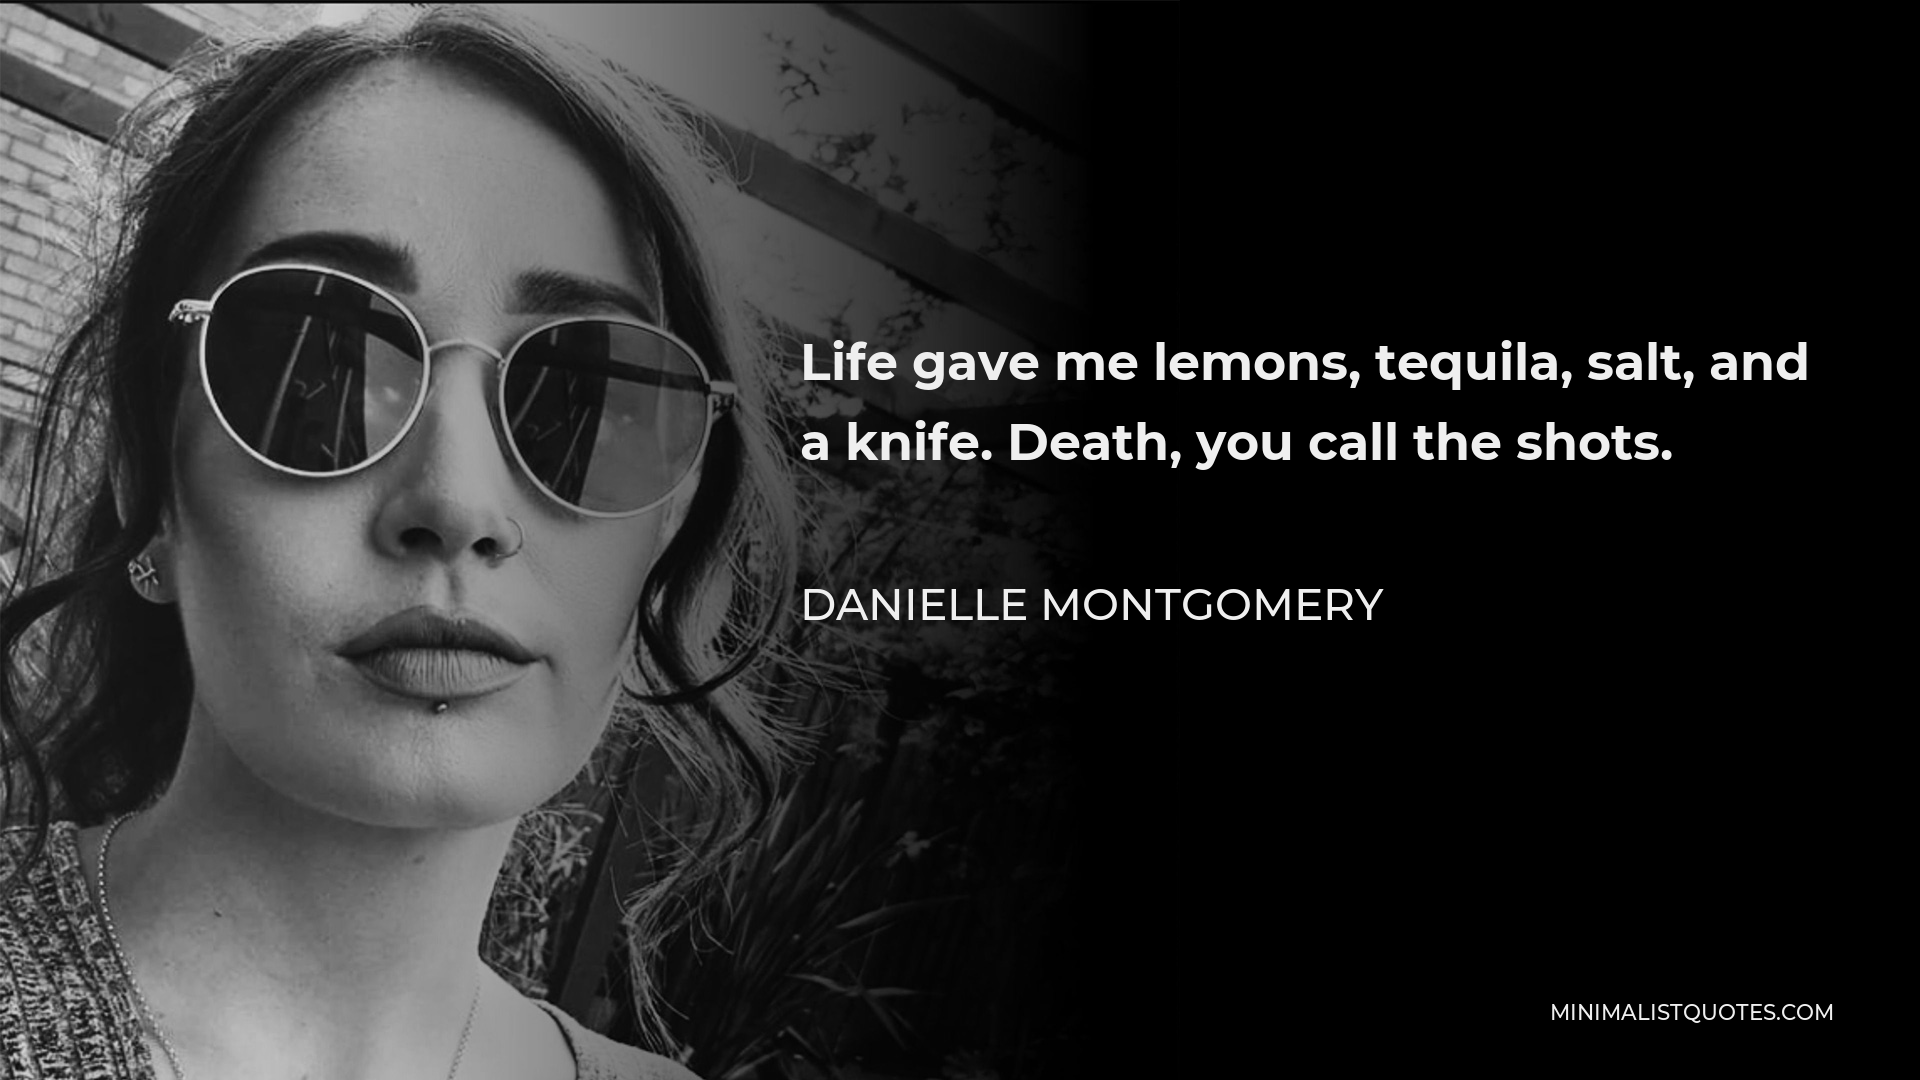 Danielle Montgomery Quote - Life gave me lemons, tequila, salt, and a knife. Death, you call the shots.